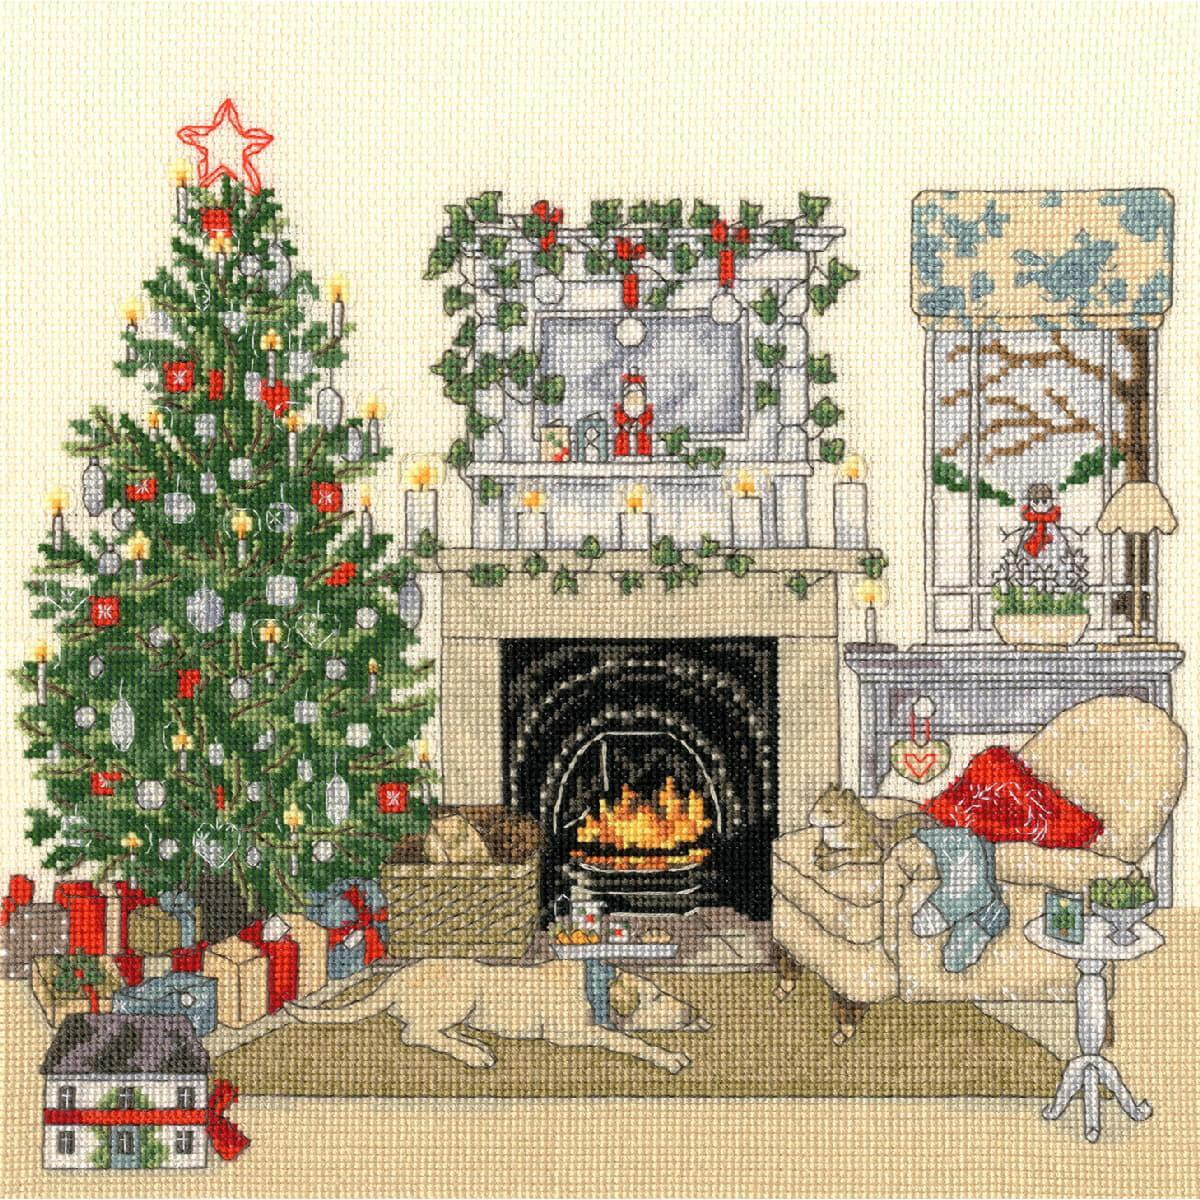 A cozy living room at Christmas with a decorated tree on...